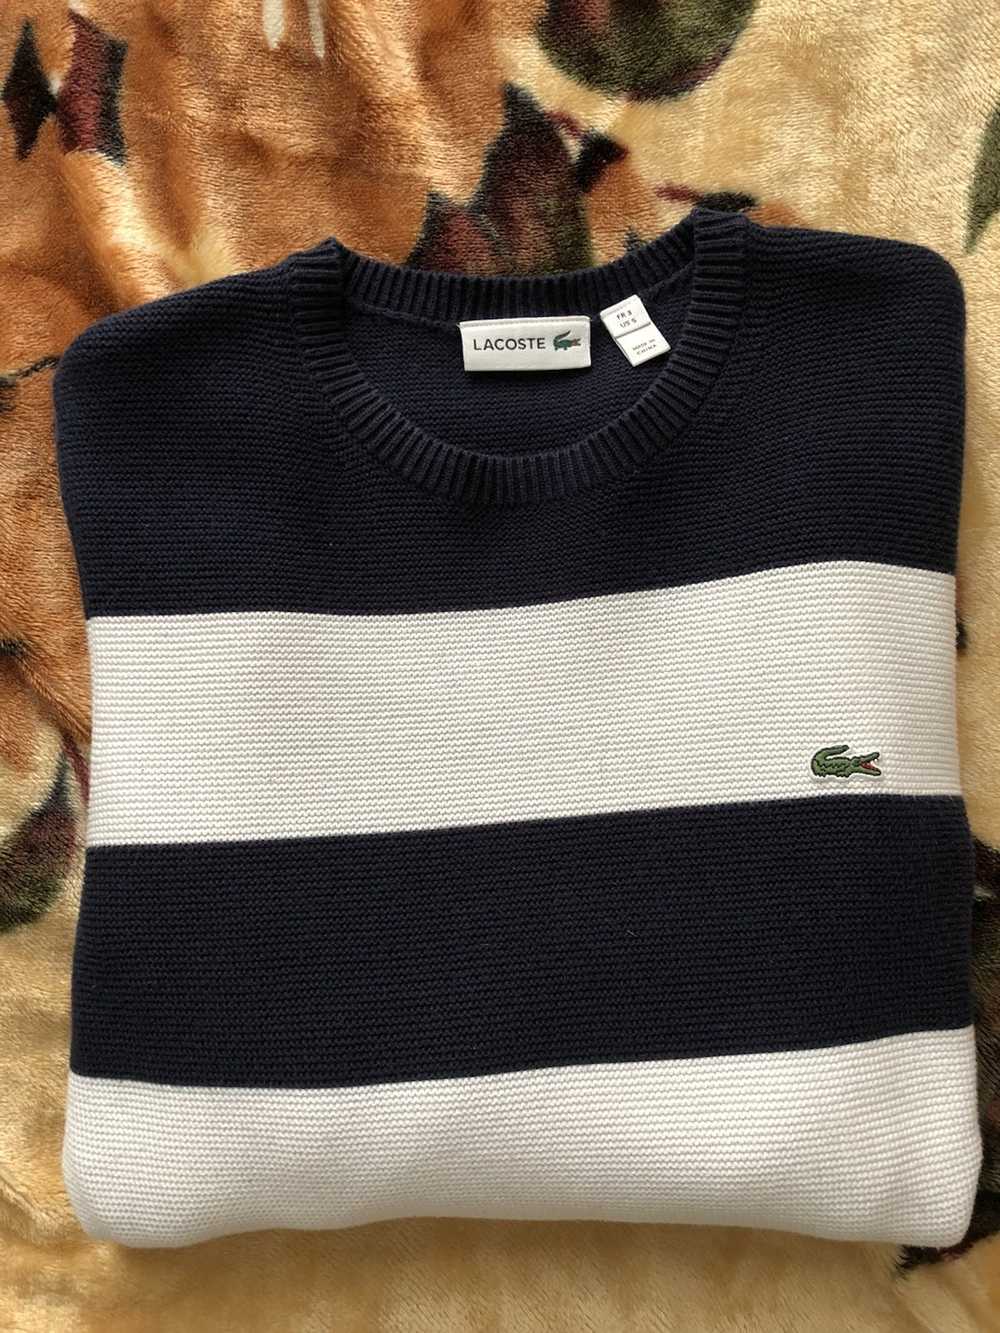 Lacoste Knit Sweater - image 1